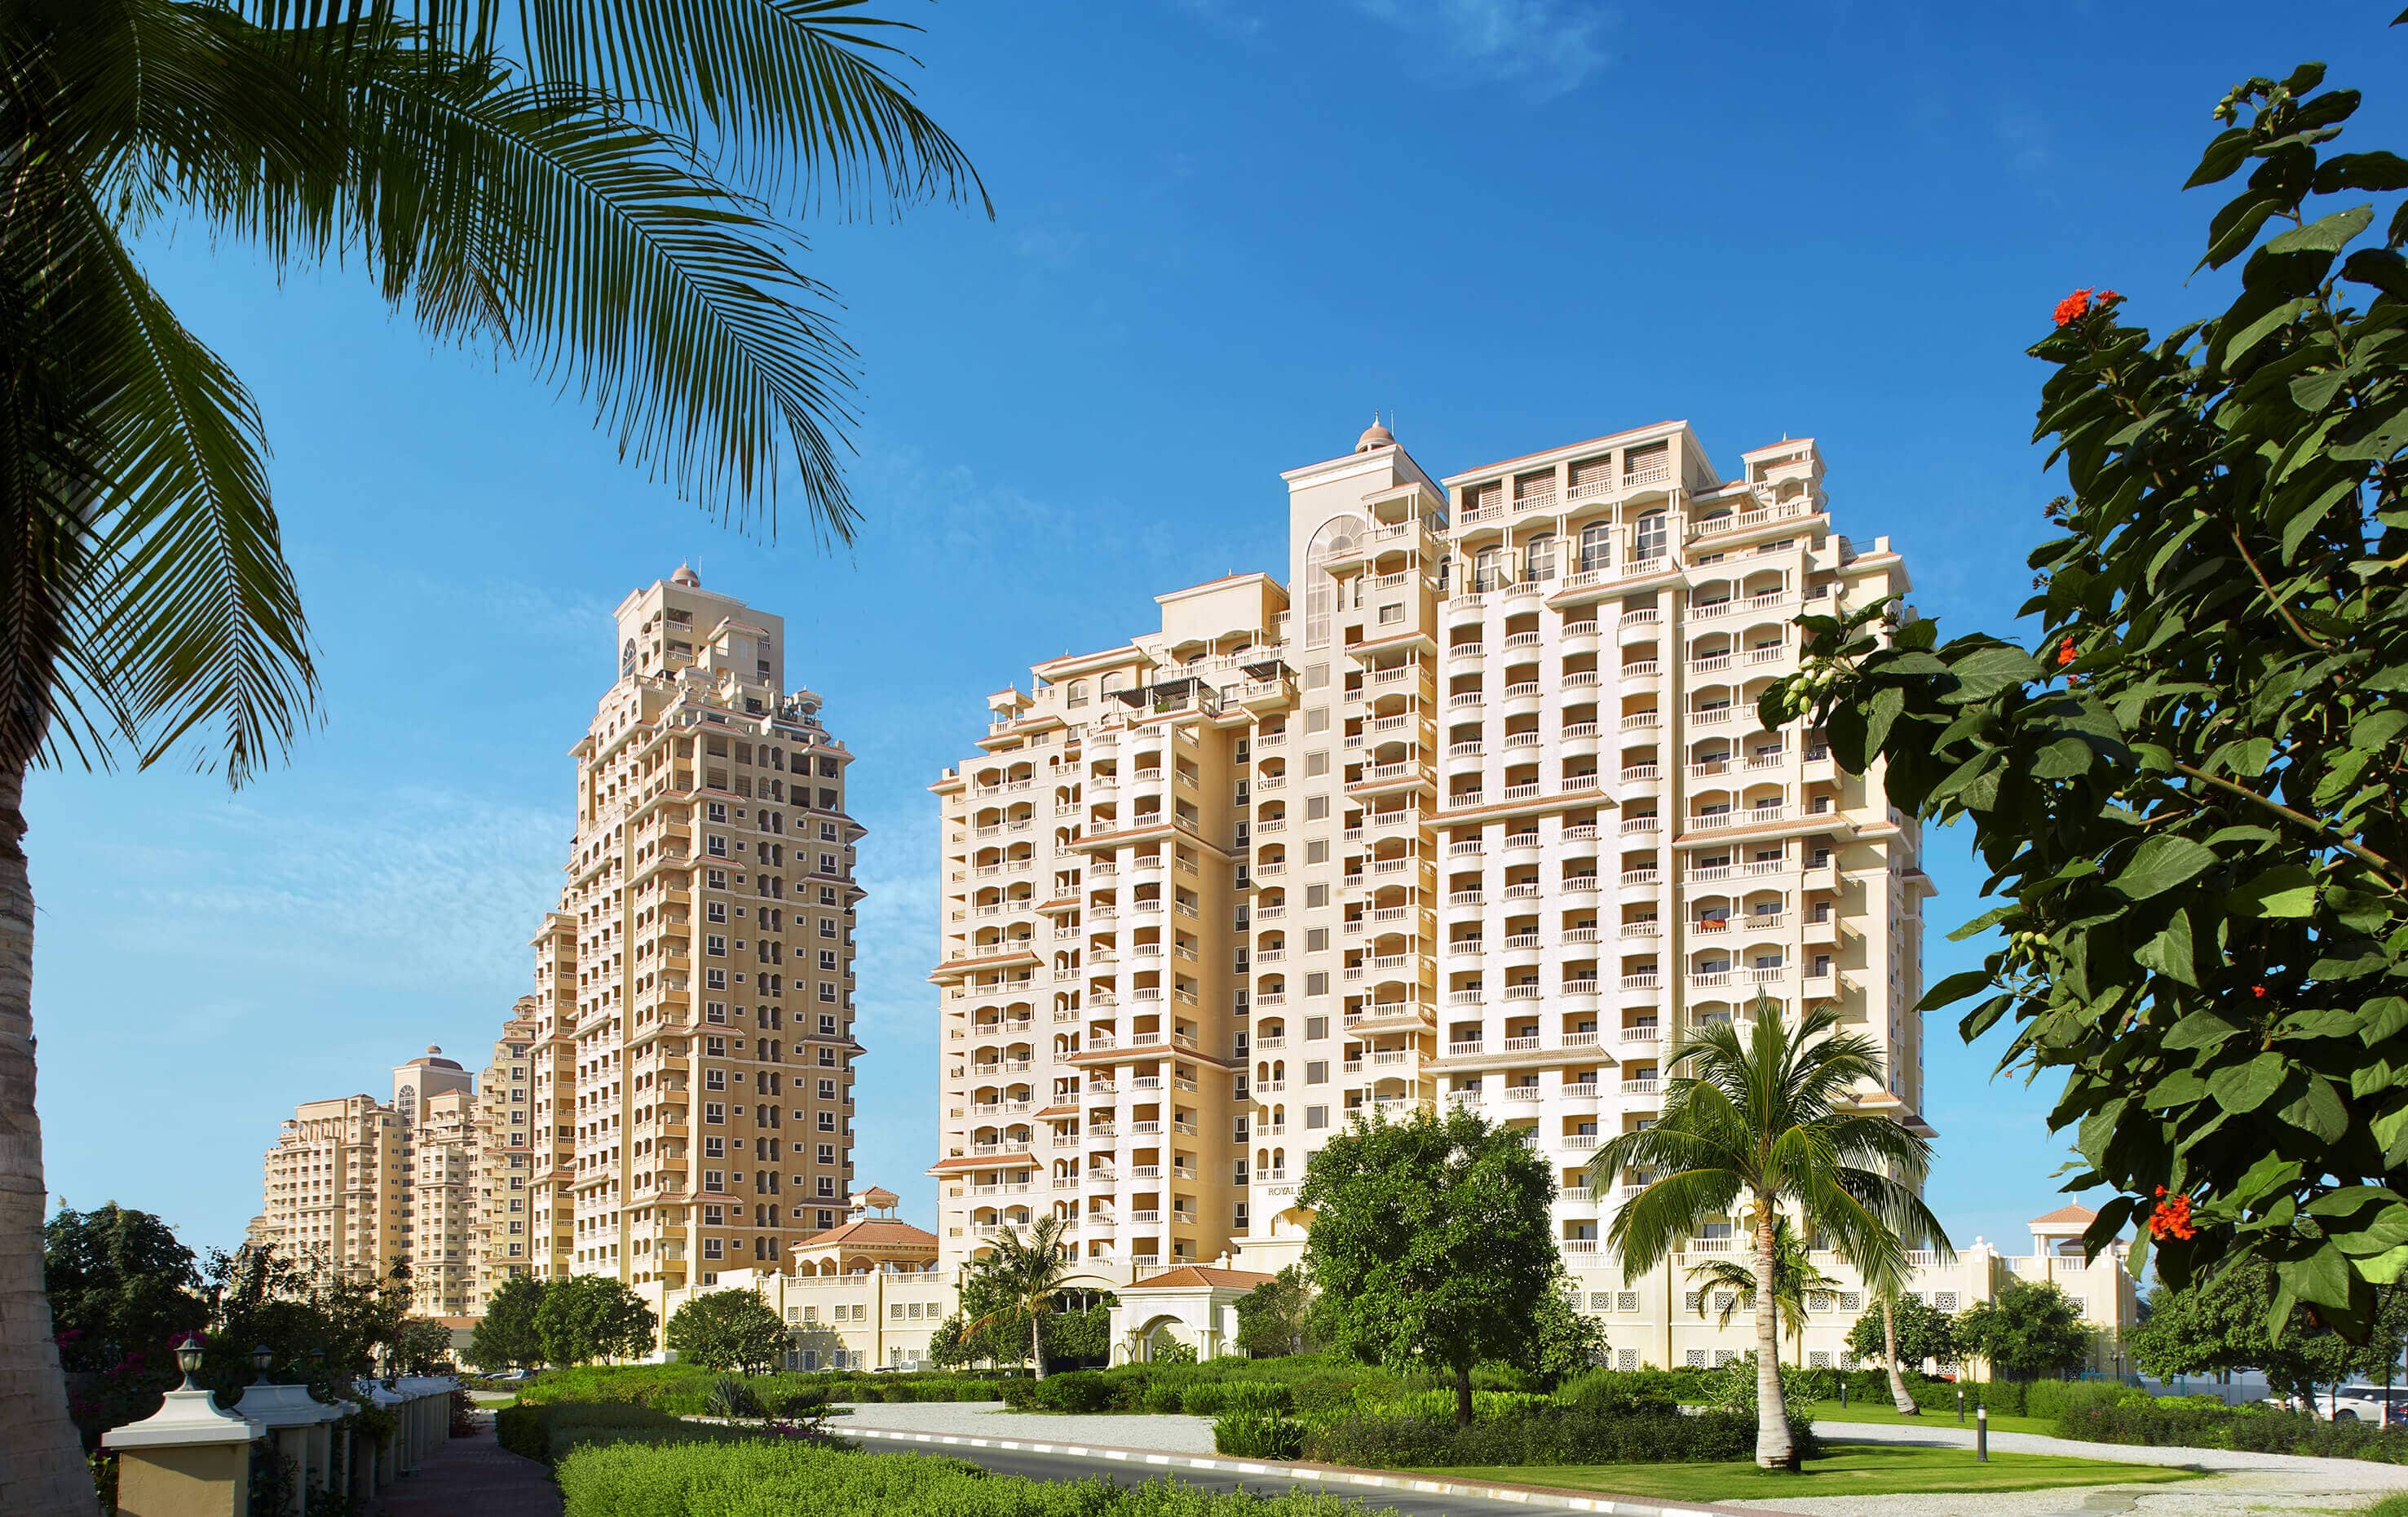 uploads/sale_property/3br-apartments-for-sale-in-royal-breeze-residence/c83ae29e6000d4b5da7accbee16f1ef6.webp